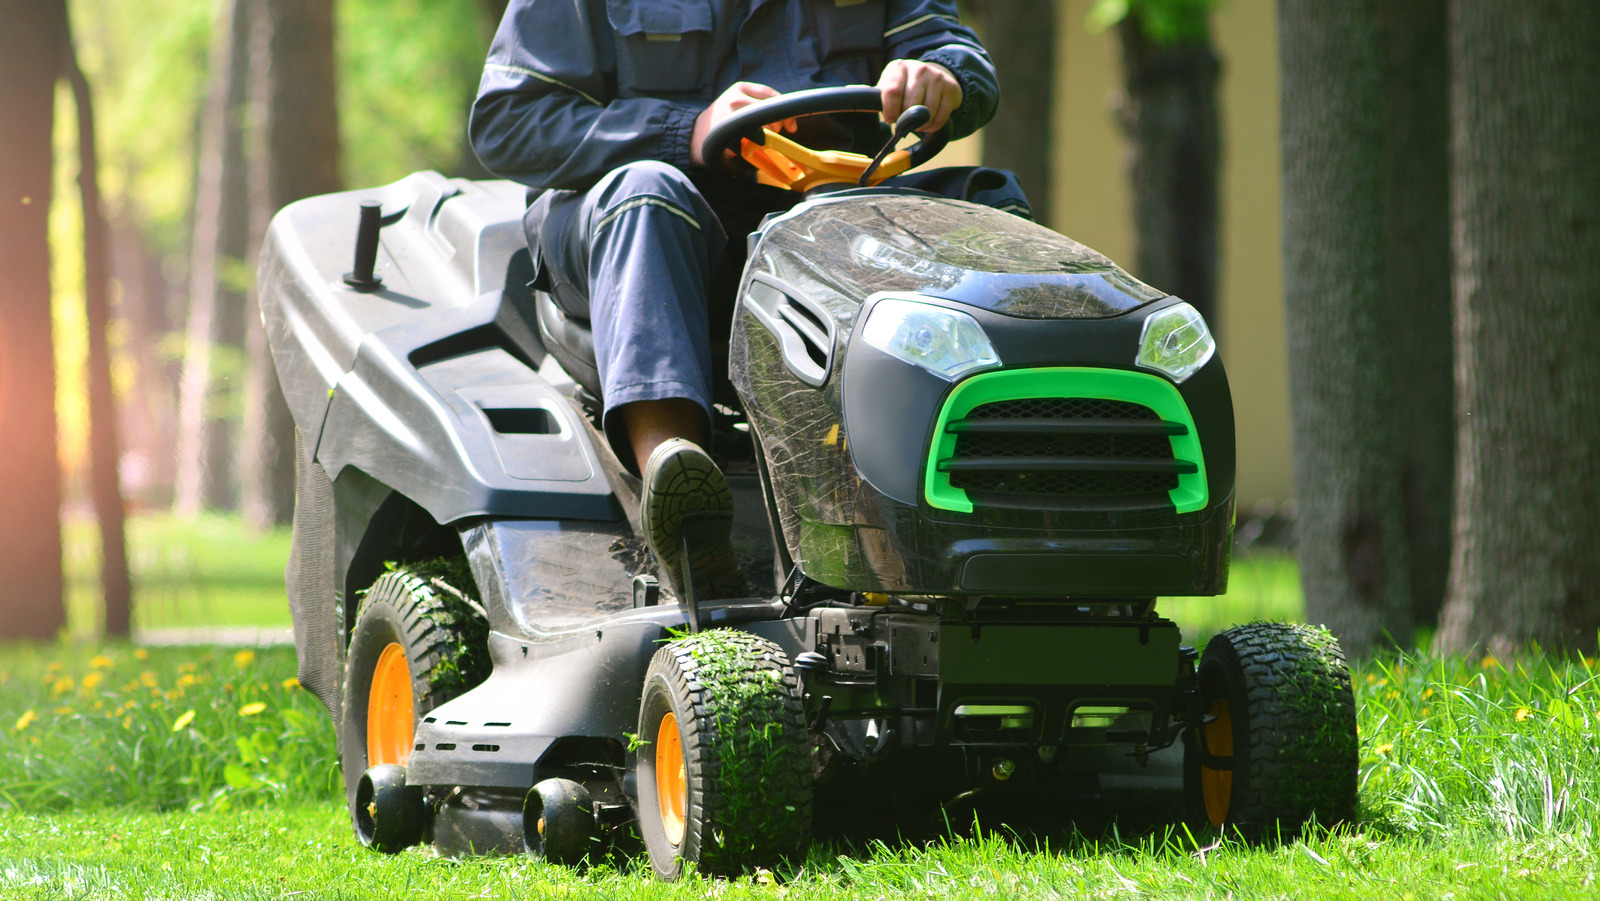 https://www.housedigest.com/img/gallery/are-murray-riding-lawn-mowers-any-good-what-we-know/l-intro-1707259176.jpg